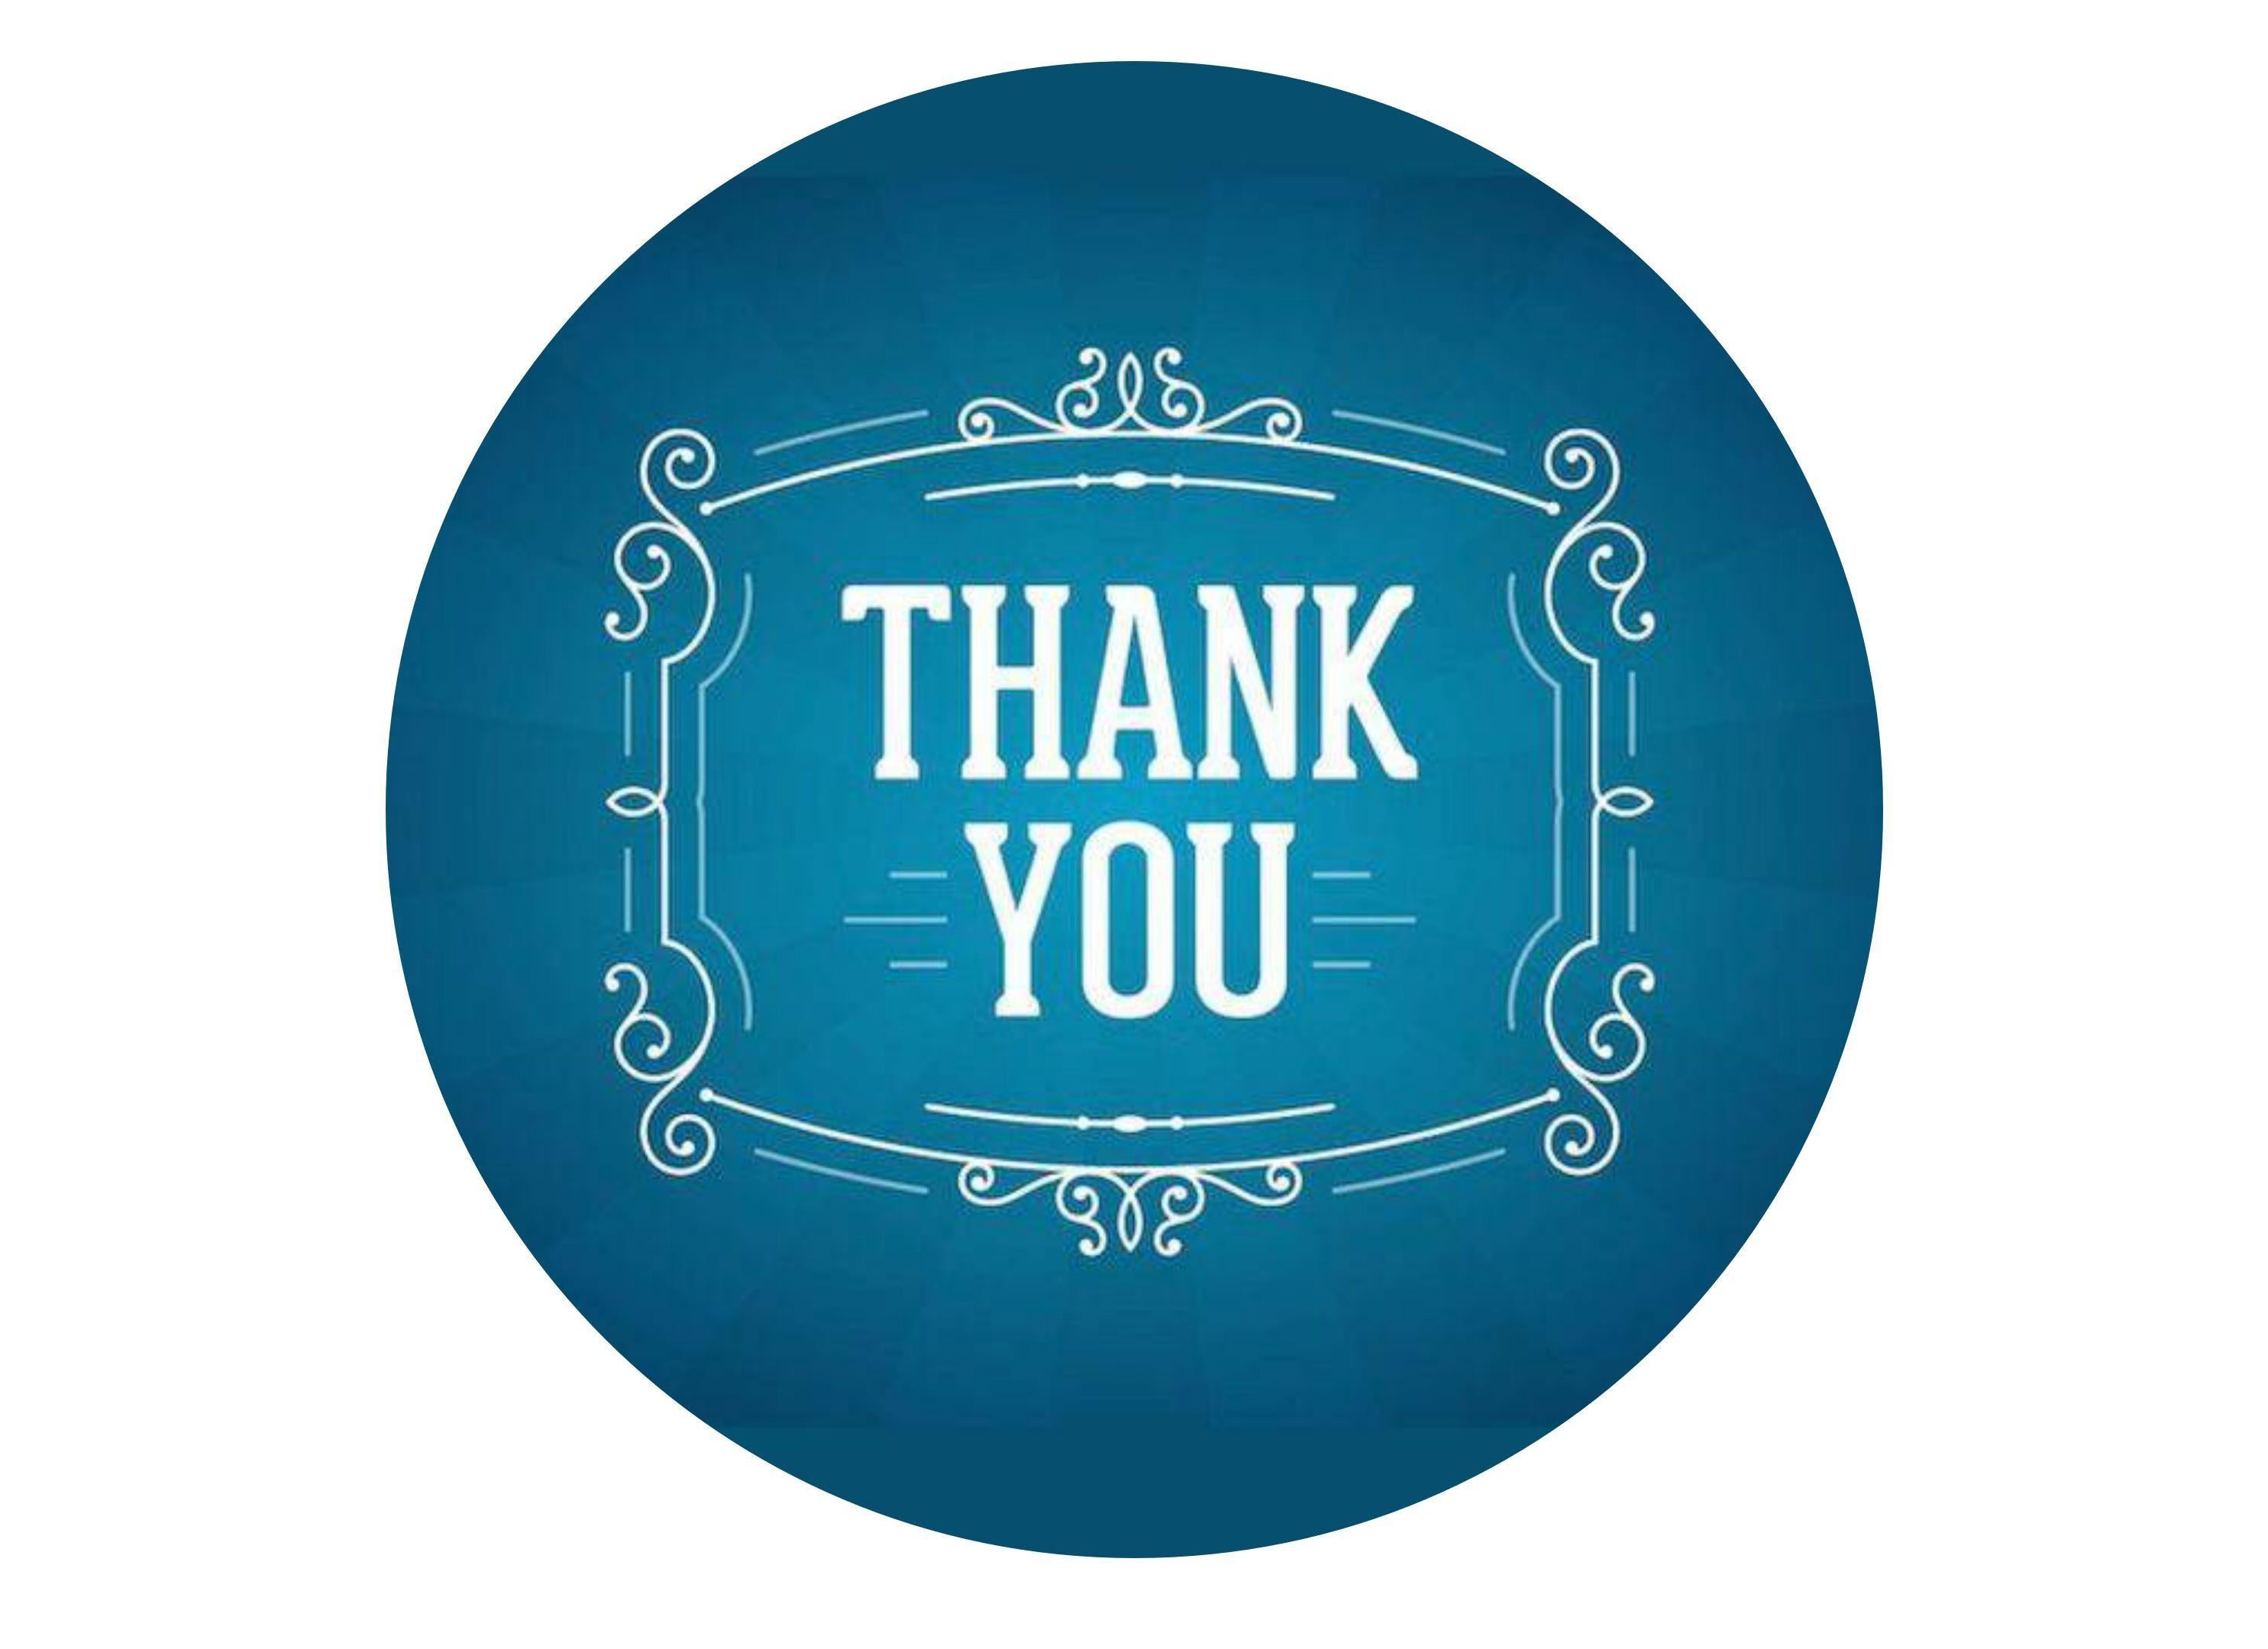 Printed edible 7.5" cake topper - thank you in blue